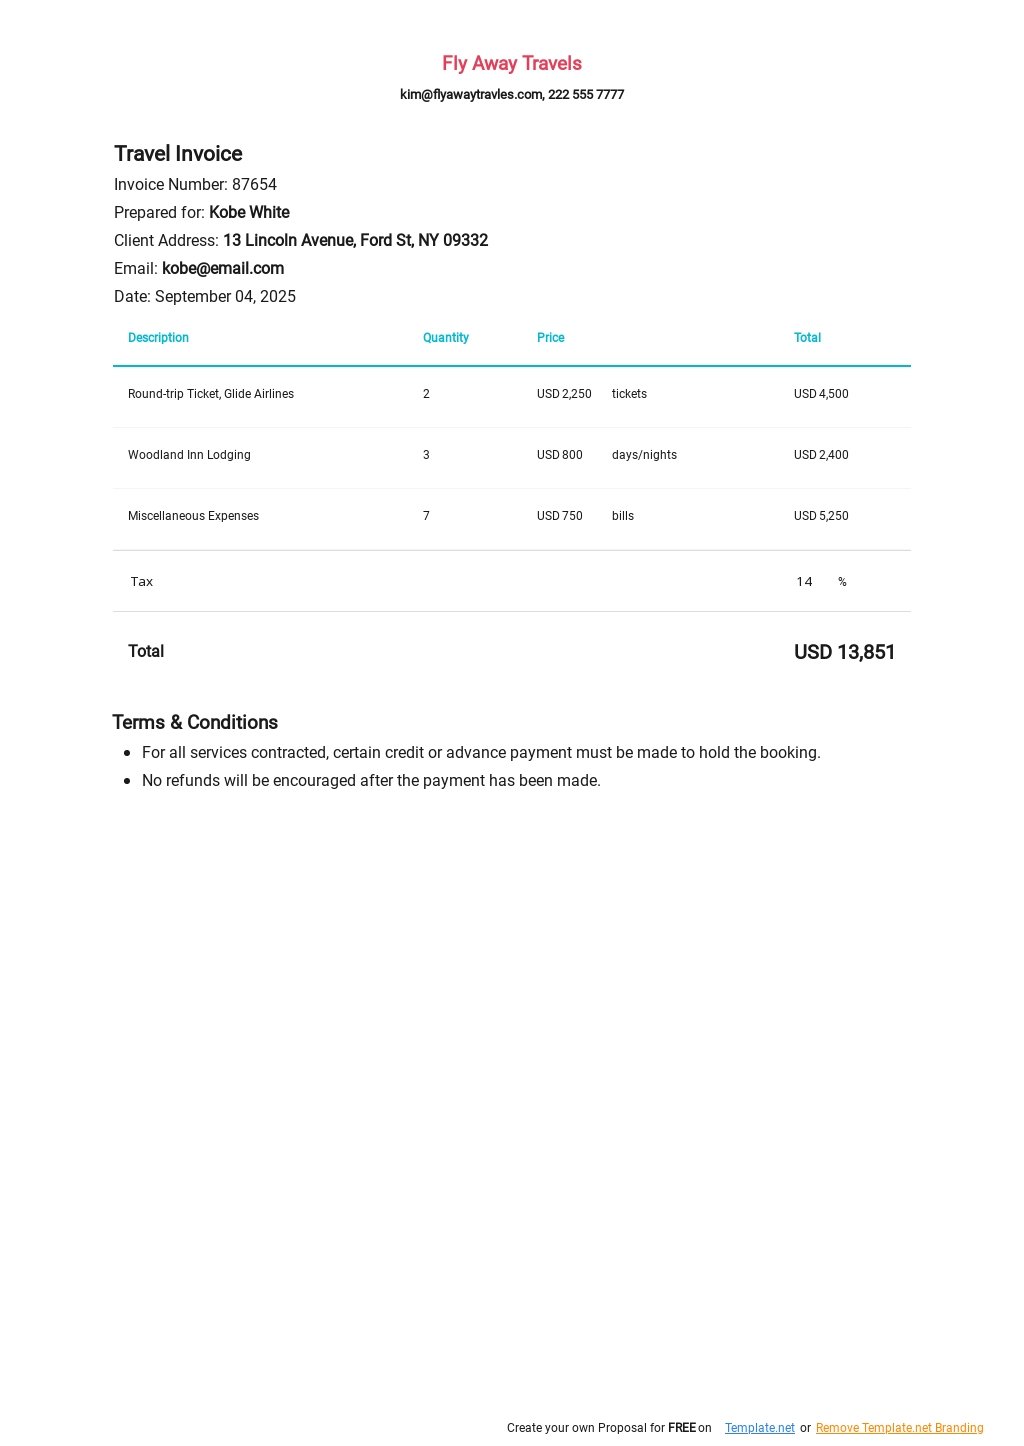 Travel Service Invoice Template in Google Docs, Google Sheets, Excel